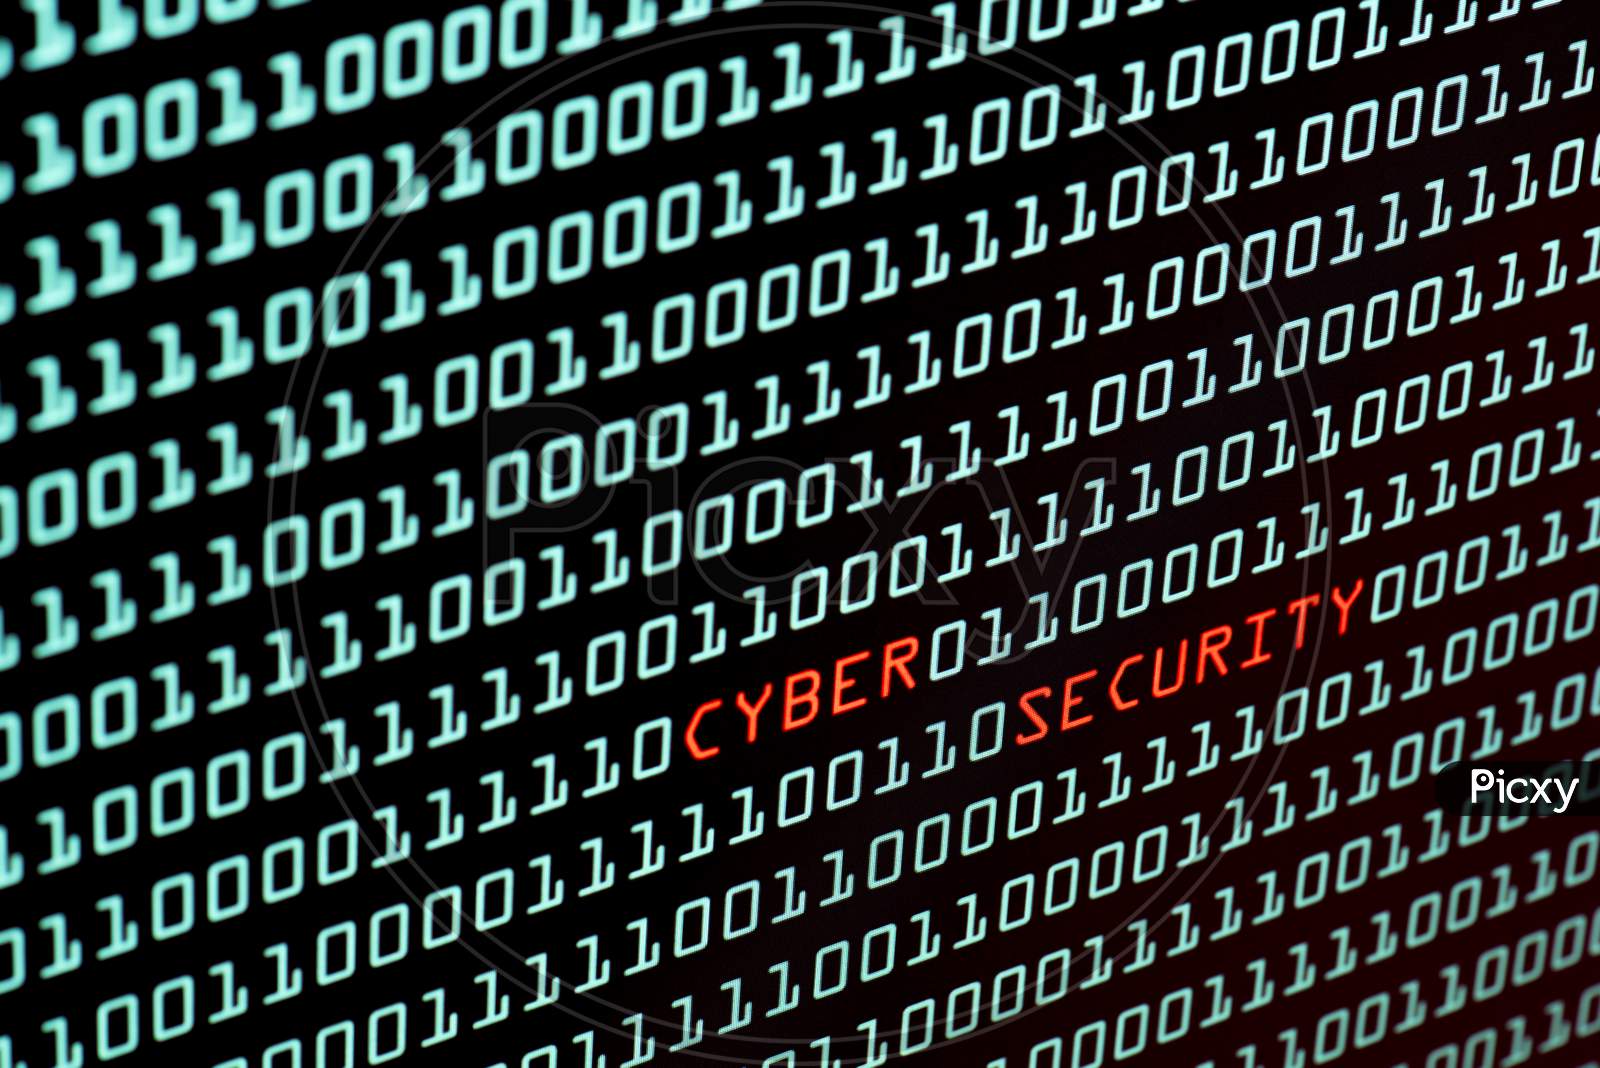 Cyber Security Text And Binary Code Concept From The Desktop Screen, Selective Focus